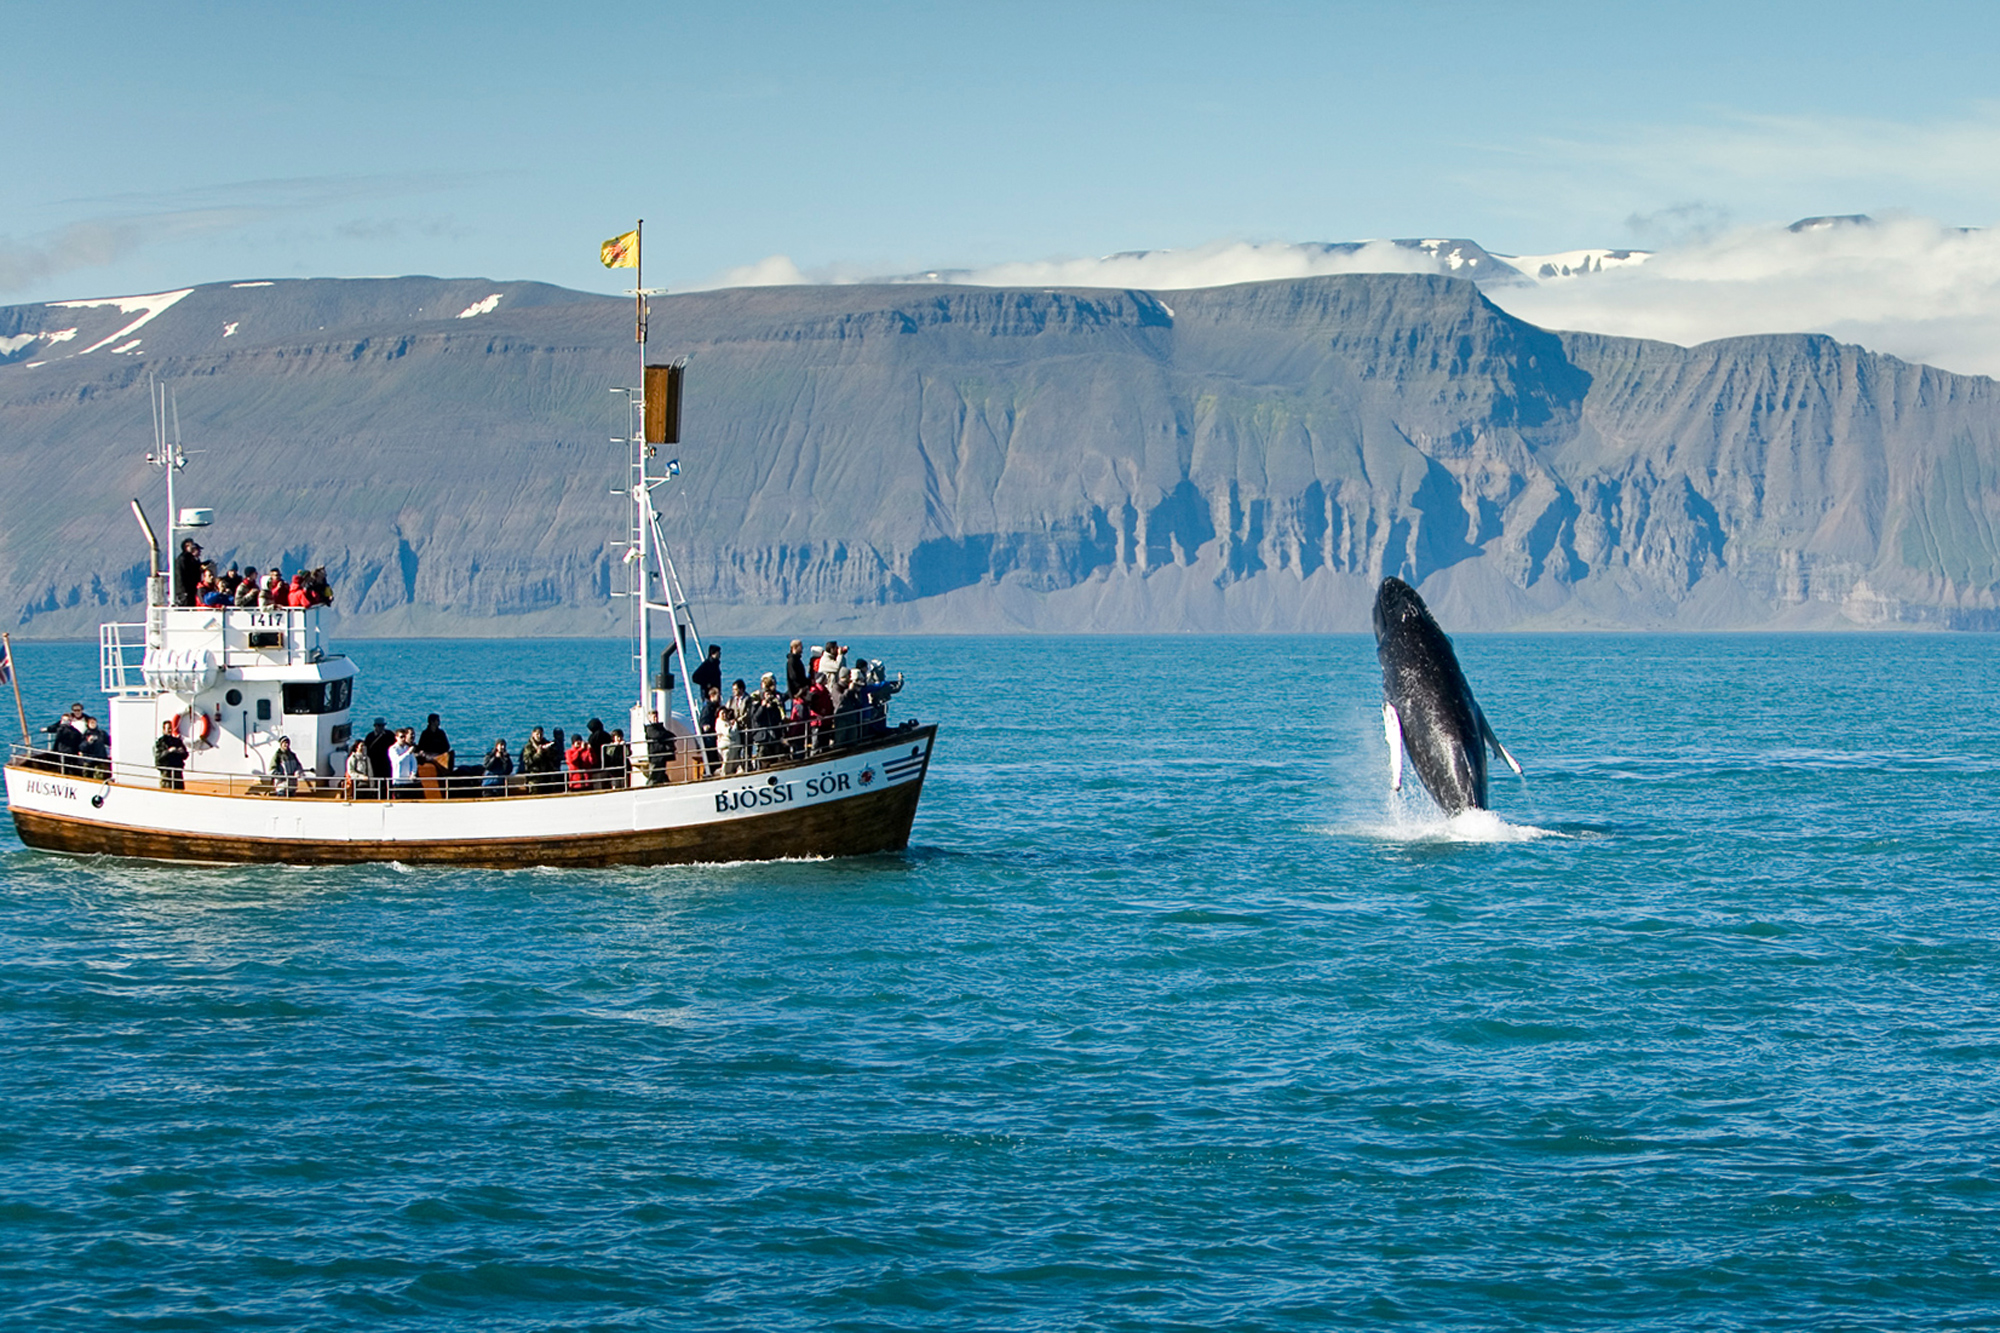 People on a boat watching a flipping whale in the ocean